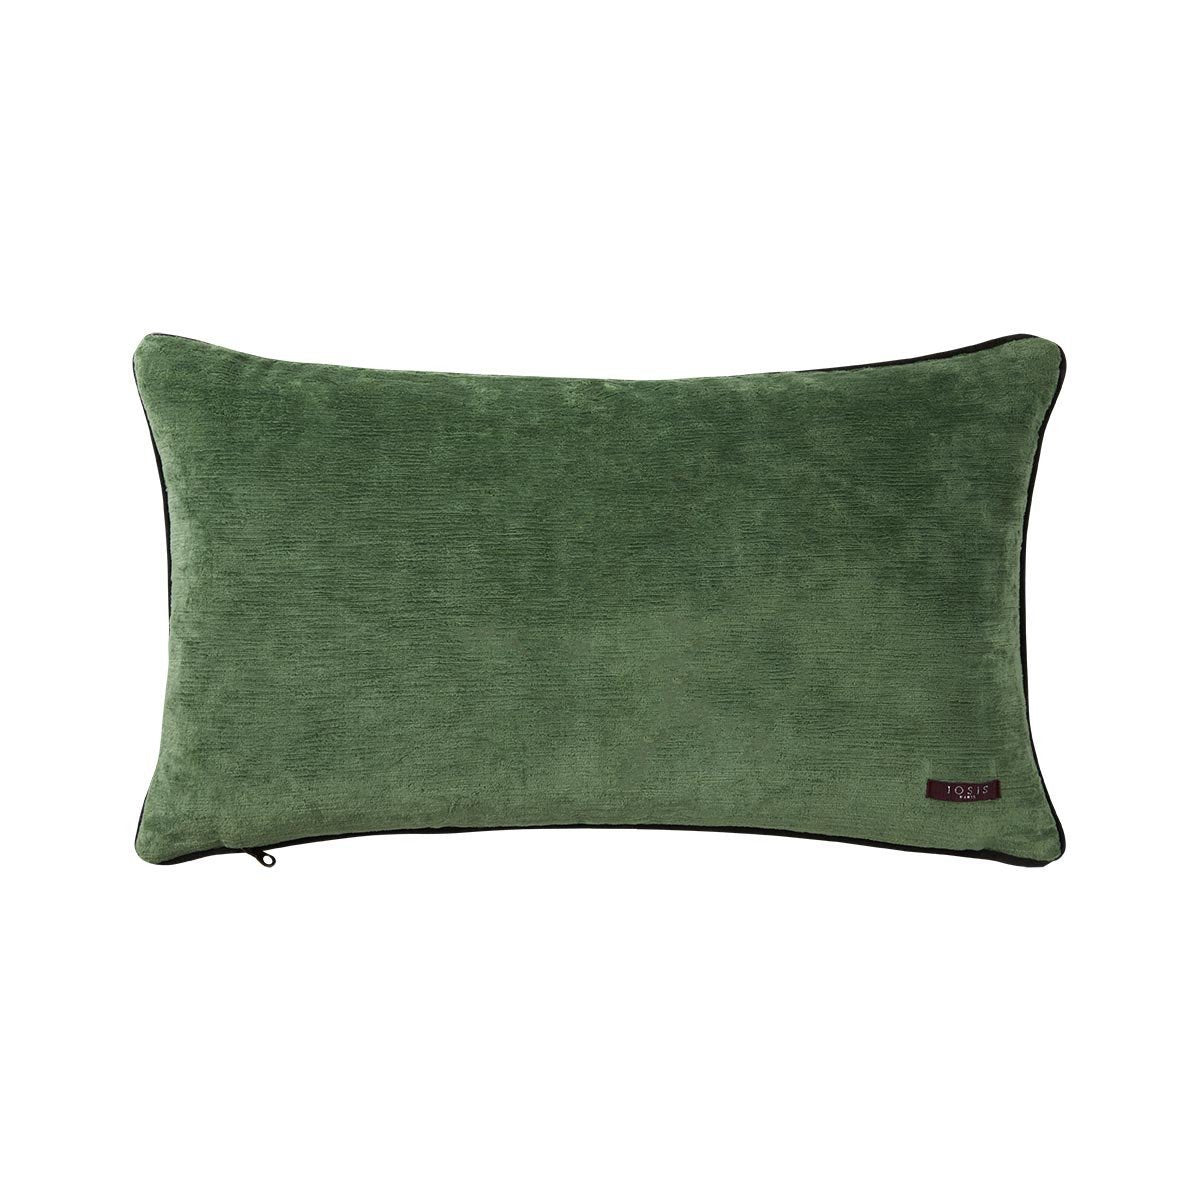 Boromee Menthe Lumbar Pillow by Iosis | Fig Linens and Home - FIG ...